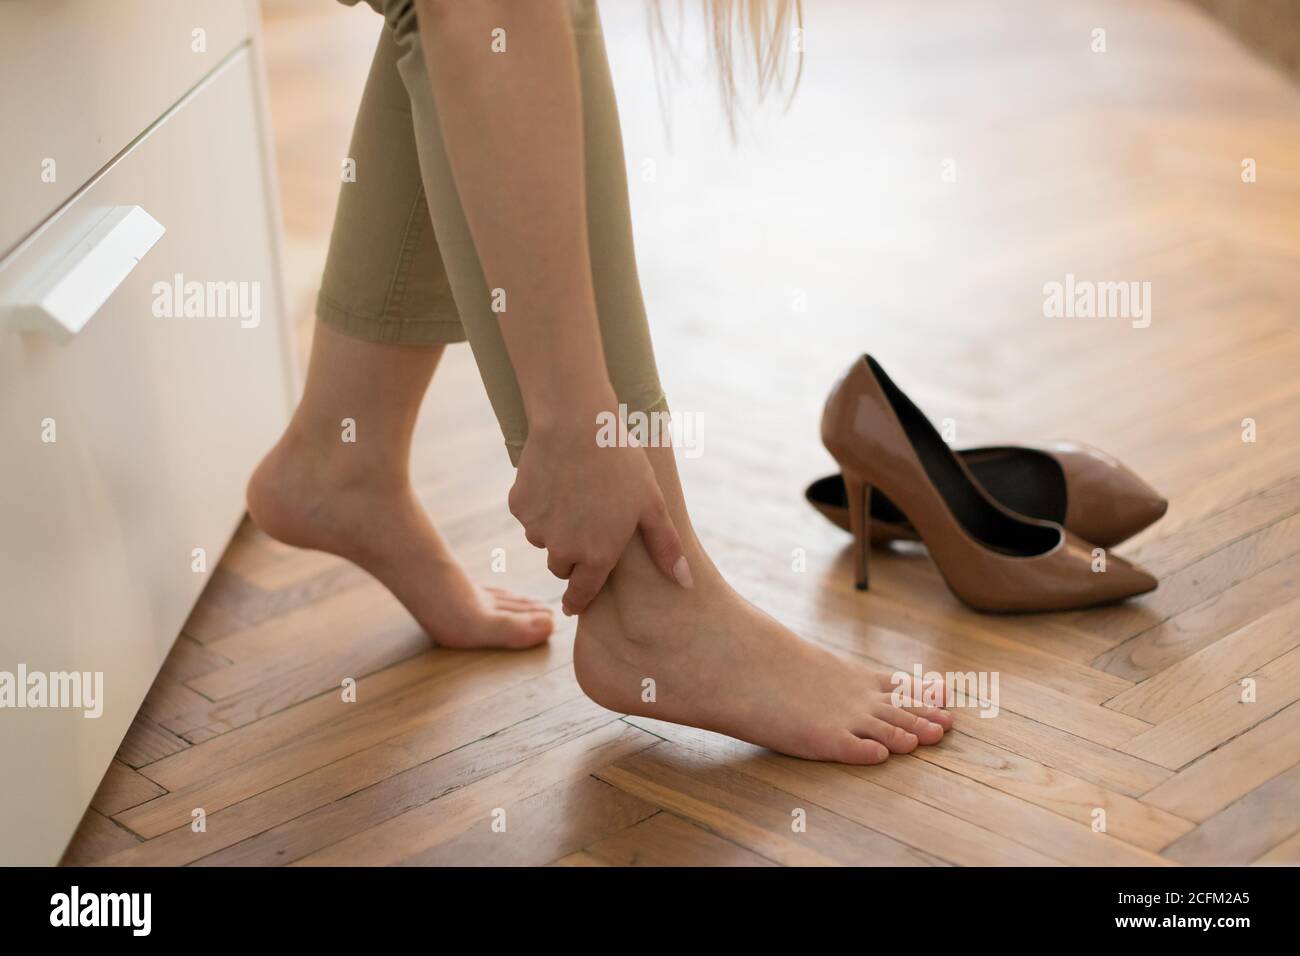 Tired woman touching her ankle, suffering from leg pain because of uncomfortable shoes, feet pain wear high heel shoes after work or walk. Swelling of Stock Photo